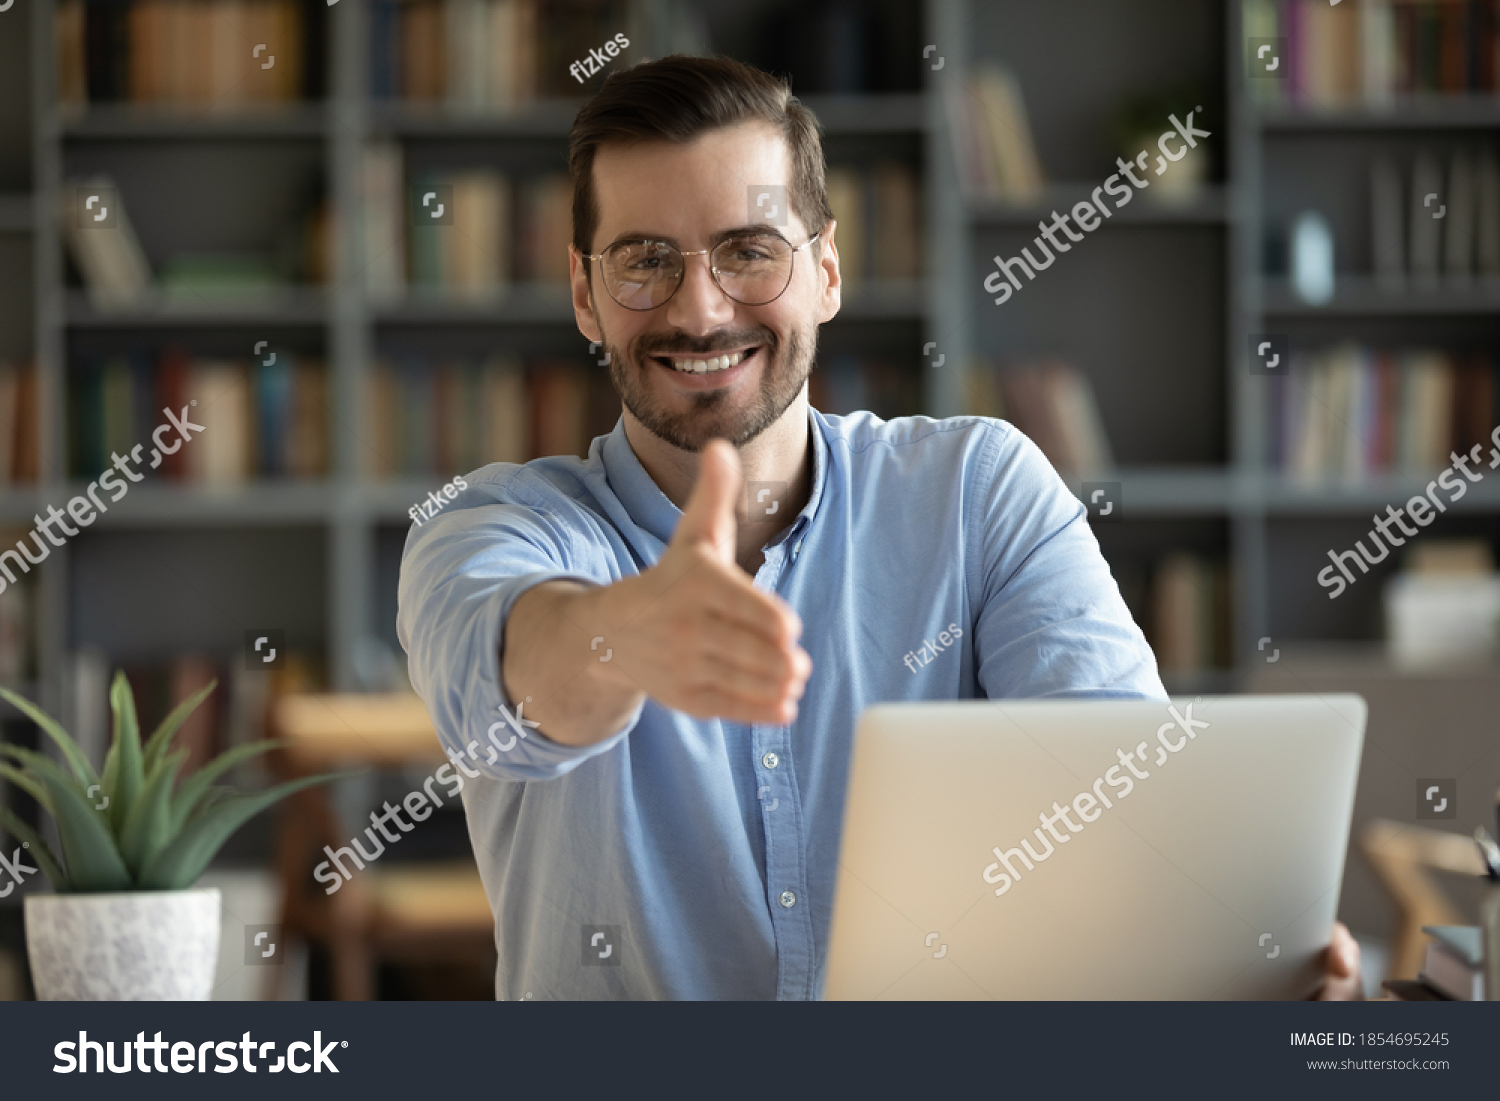 Human resource agent male recruiter sit at desk extends his hand to camera for handshake greeting applicant showing polite gesture start job interview in modern office. Welcoming, cooperation concept #1854695245